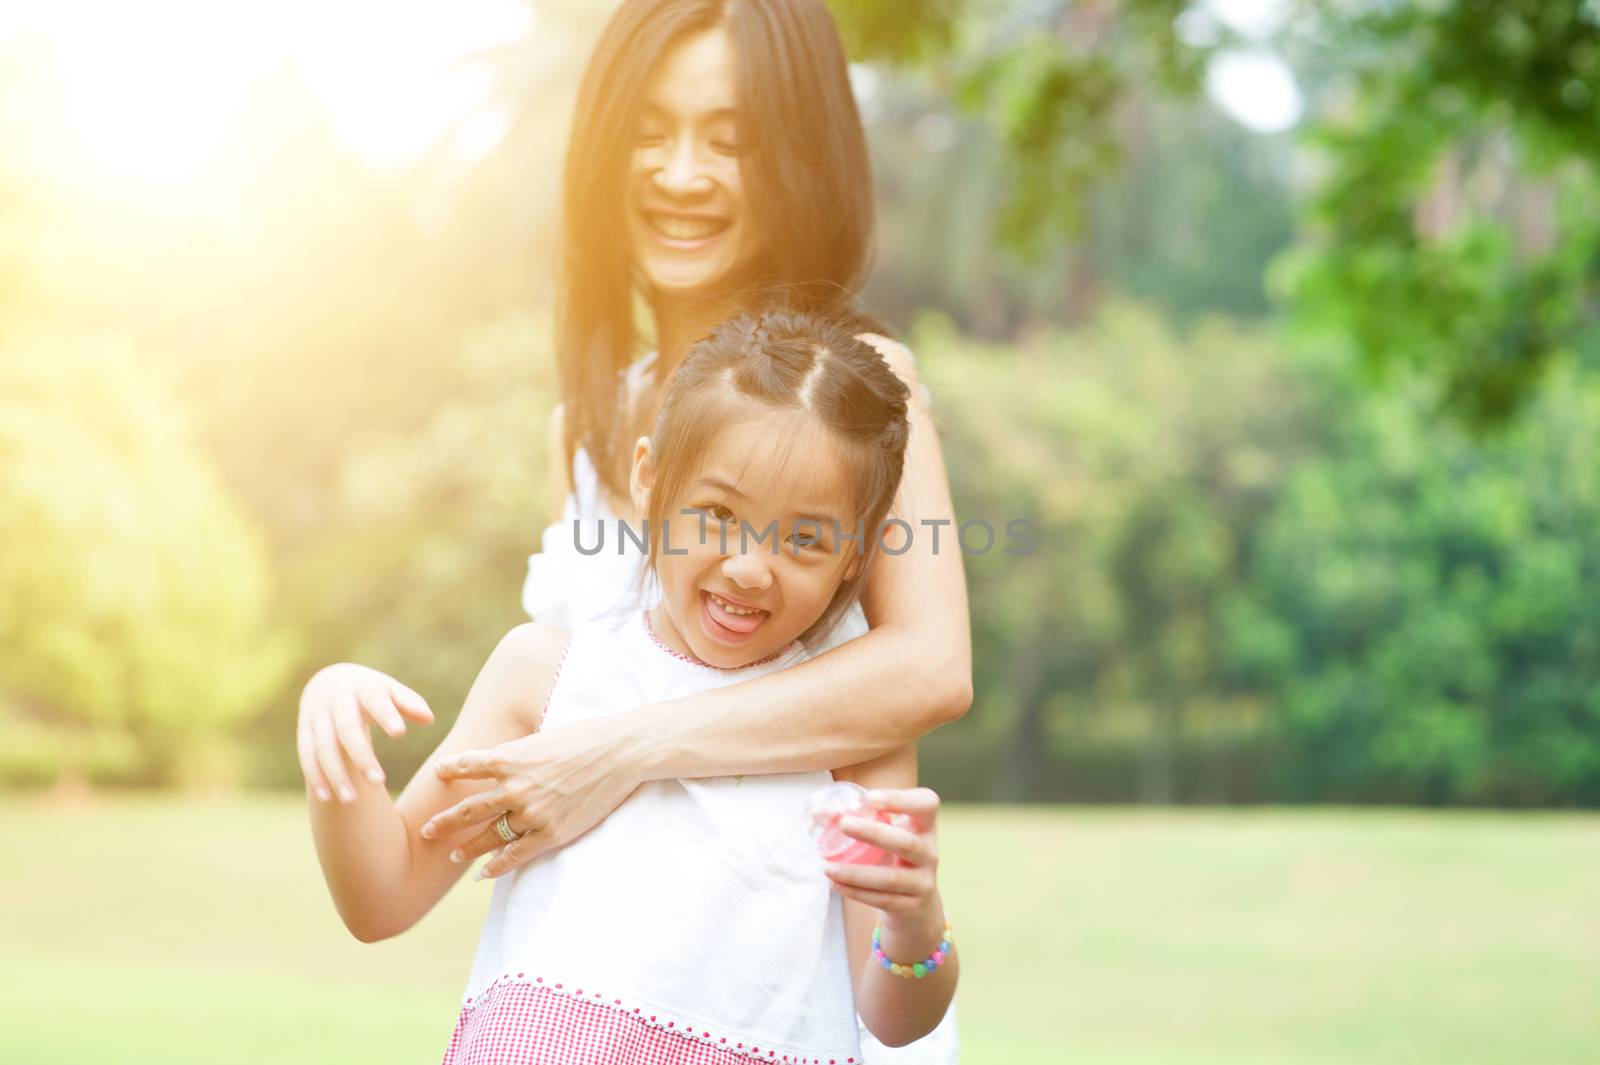 Love between mother and daughter, family outdoor fun, morning with sun flare.